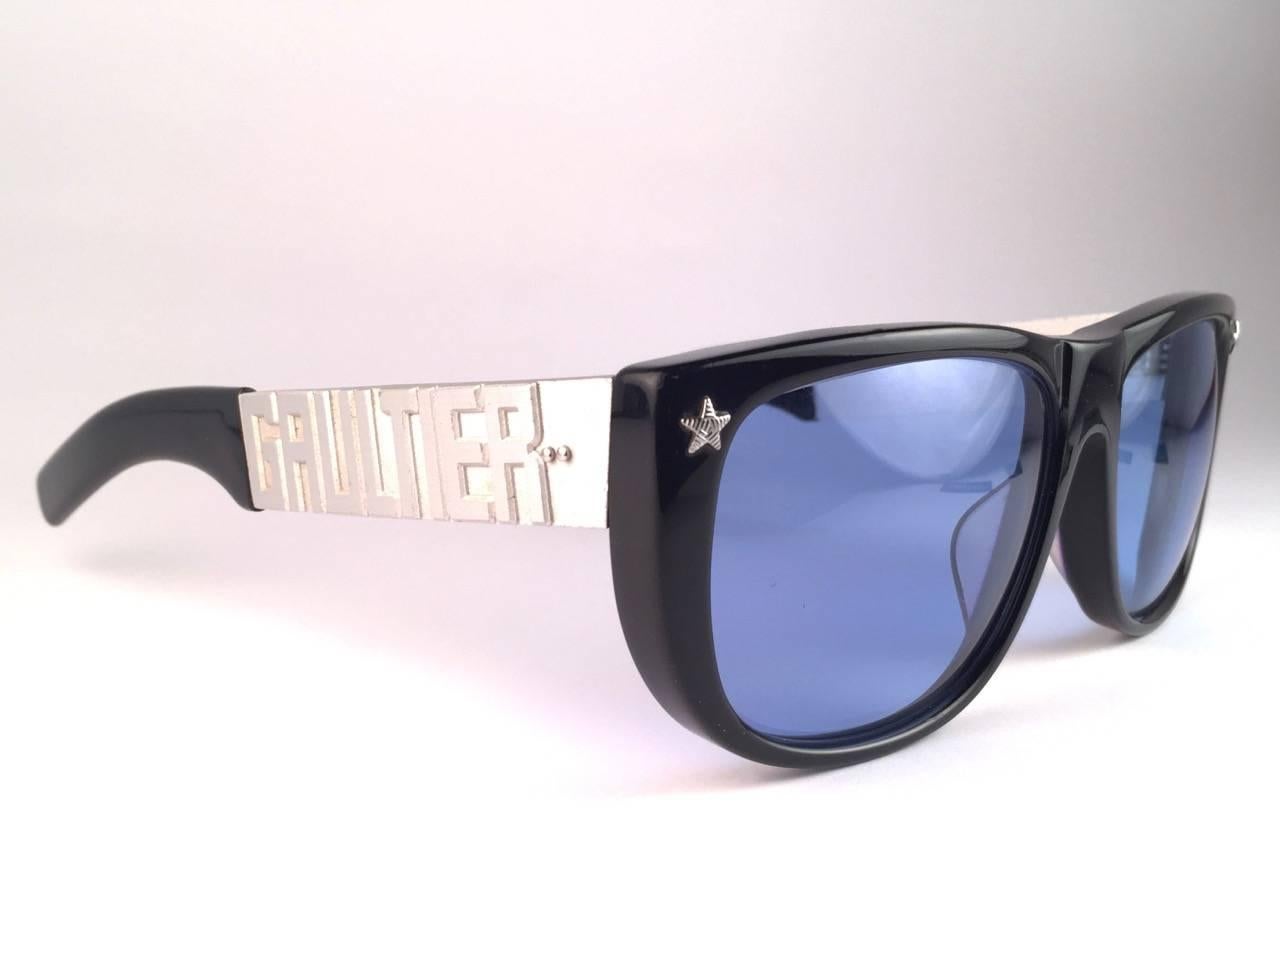 Collectors Item!!

Mint Iconic Jean Paul Gaultier 56 8272 Black with Silver Metal temples frame. 
Baby blue lenses that complete a ready to wear JPG look.
The very same model worn by Vanilla Ice in 1990's.
Amazing design with strong yet intricate